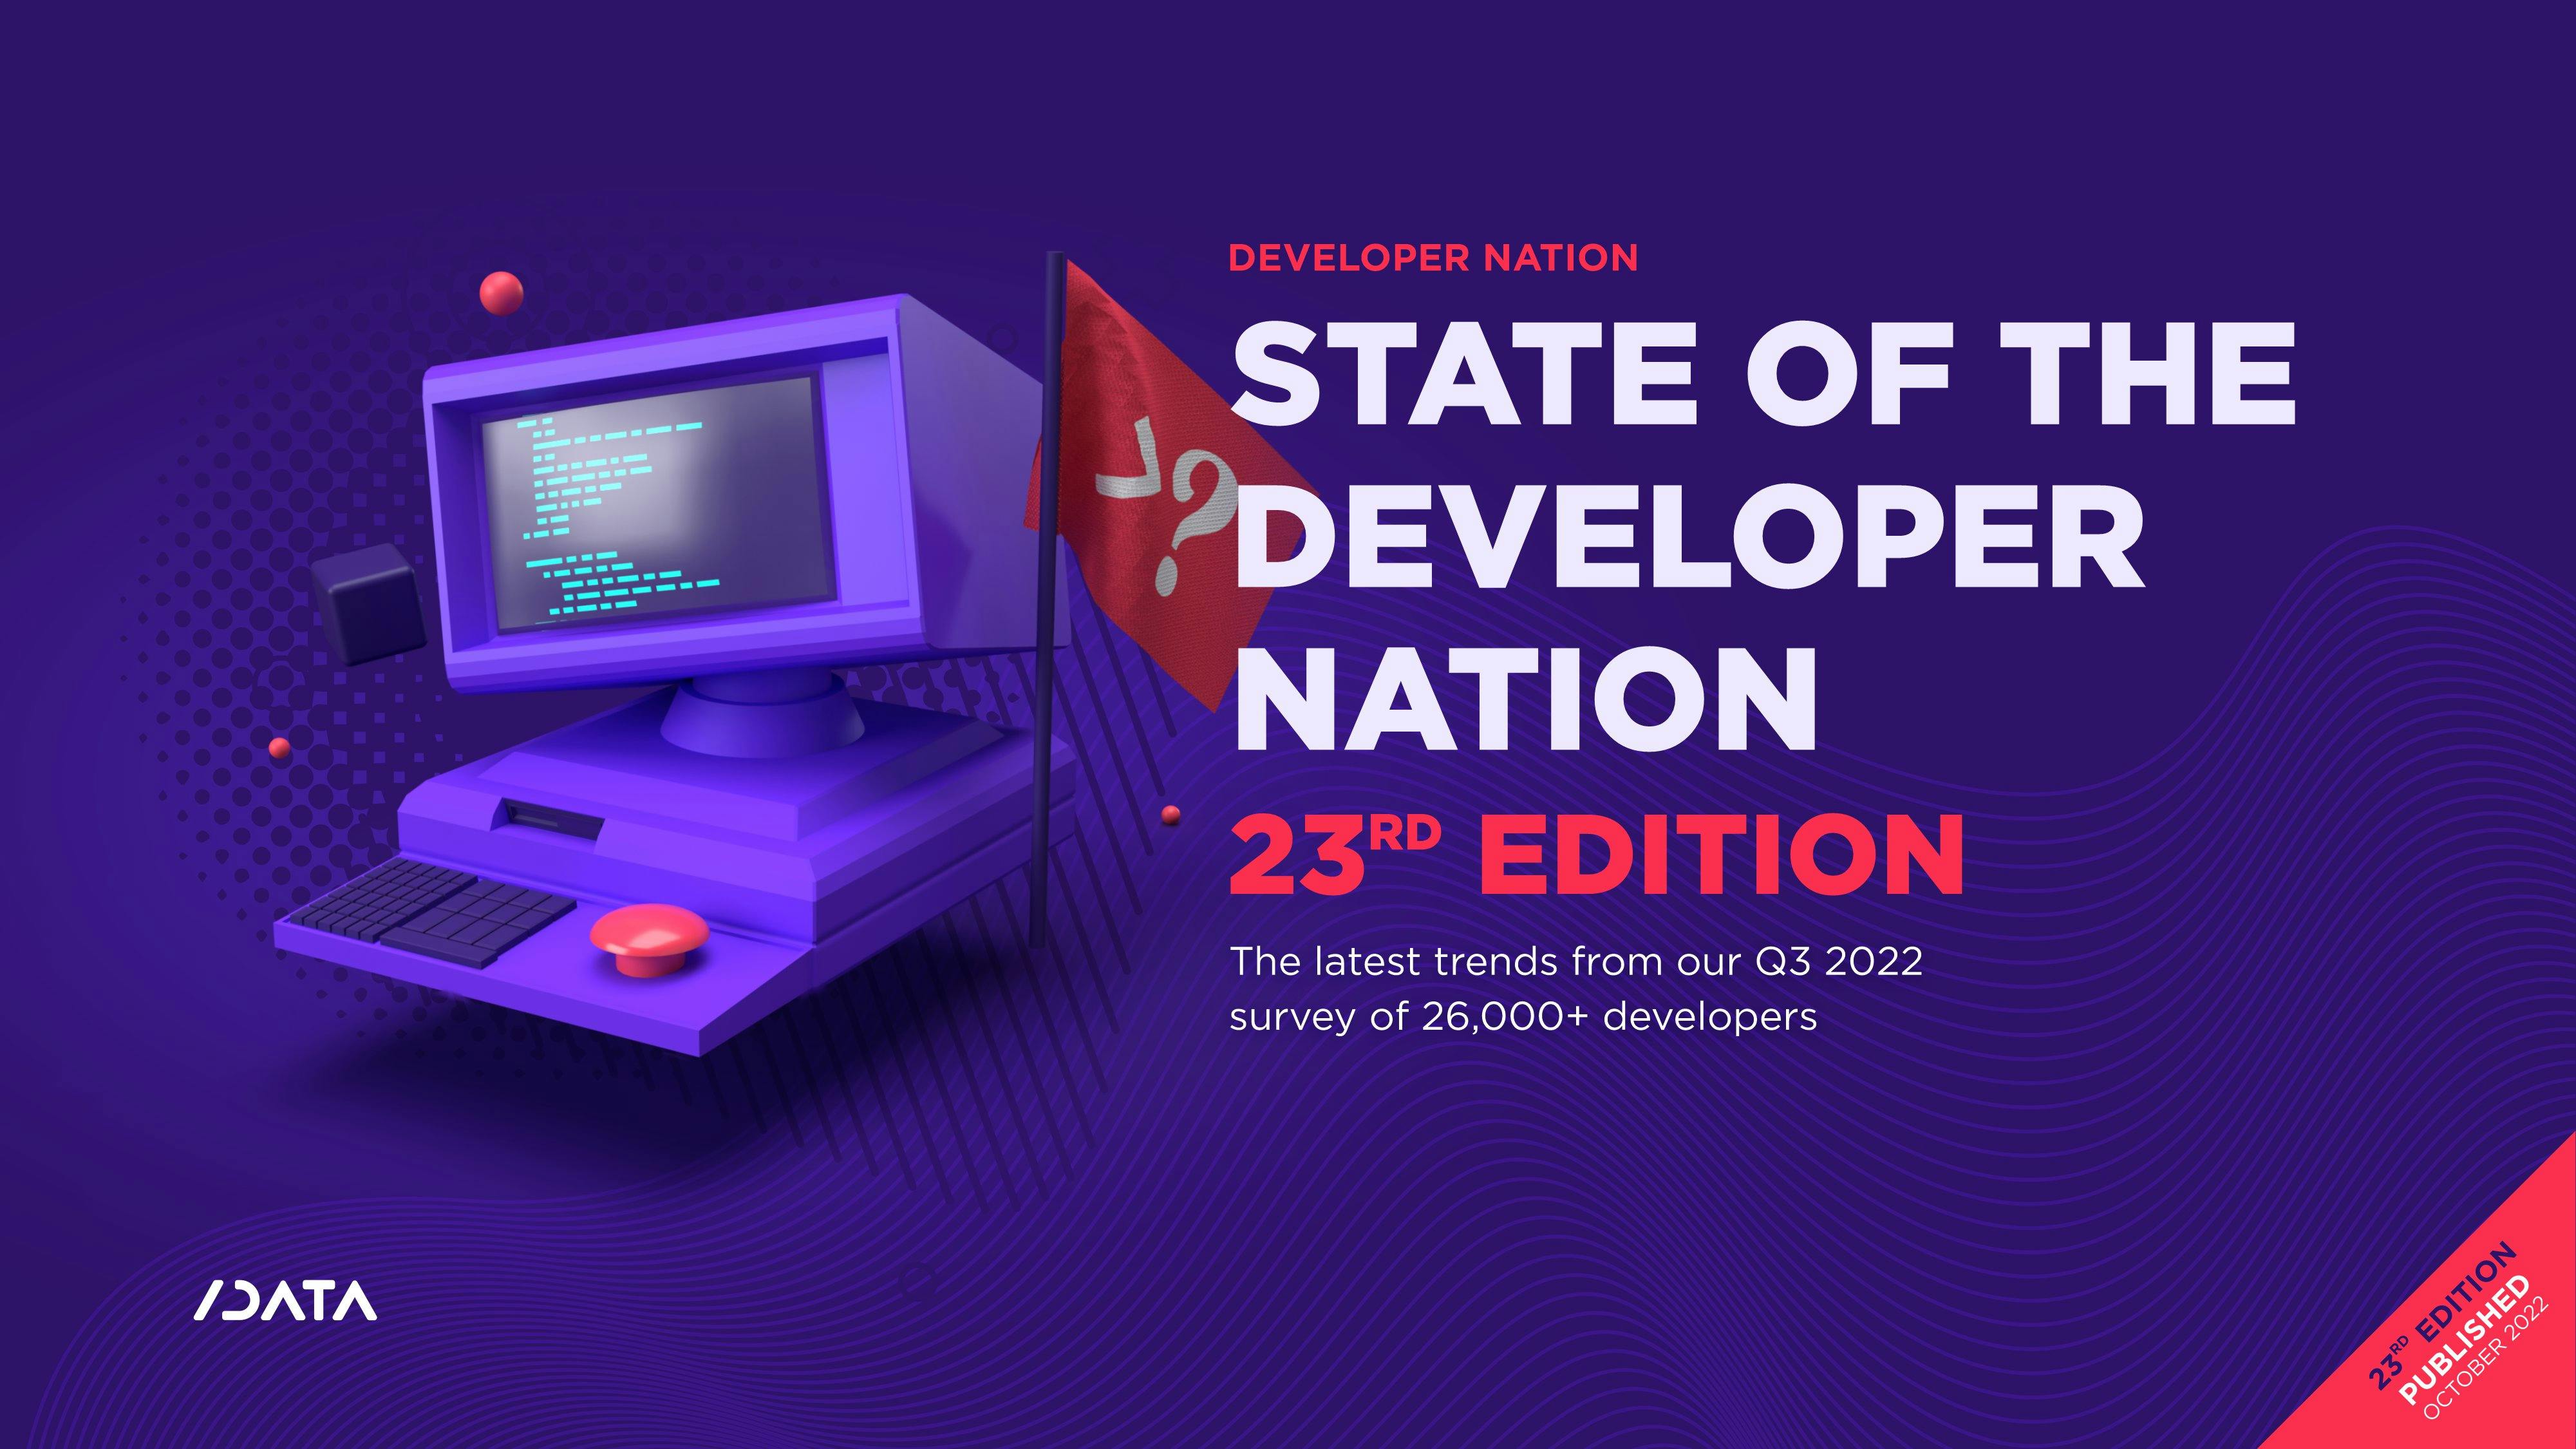 State of the Developer Nation 23rd Edition - Q3 2022